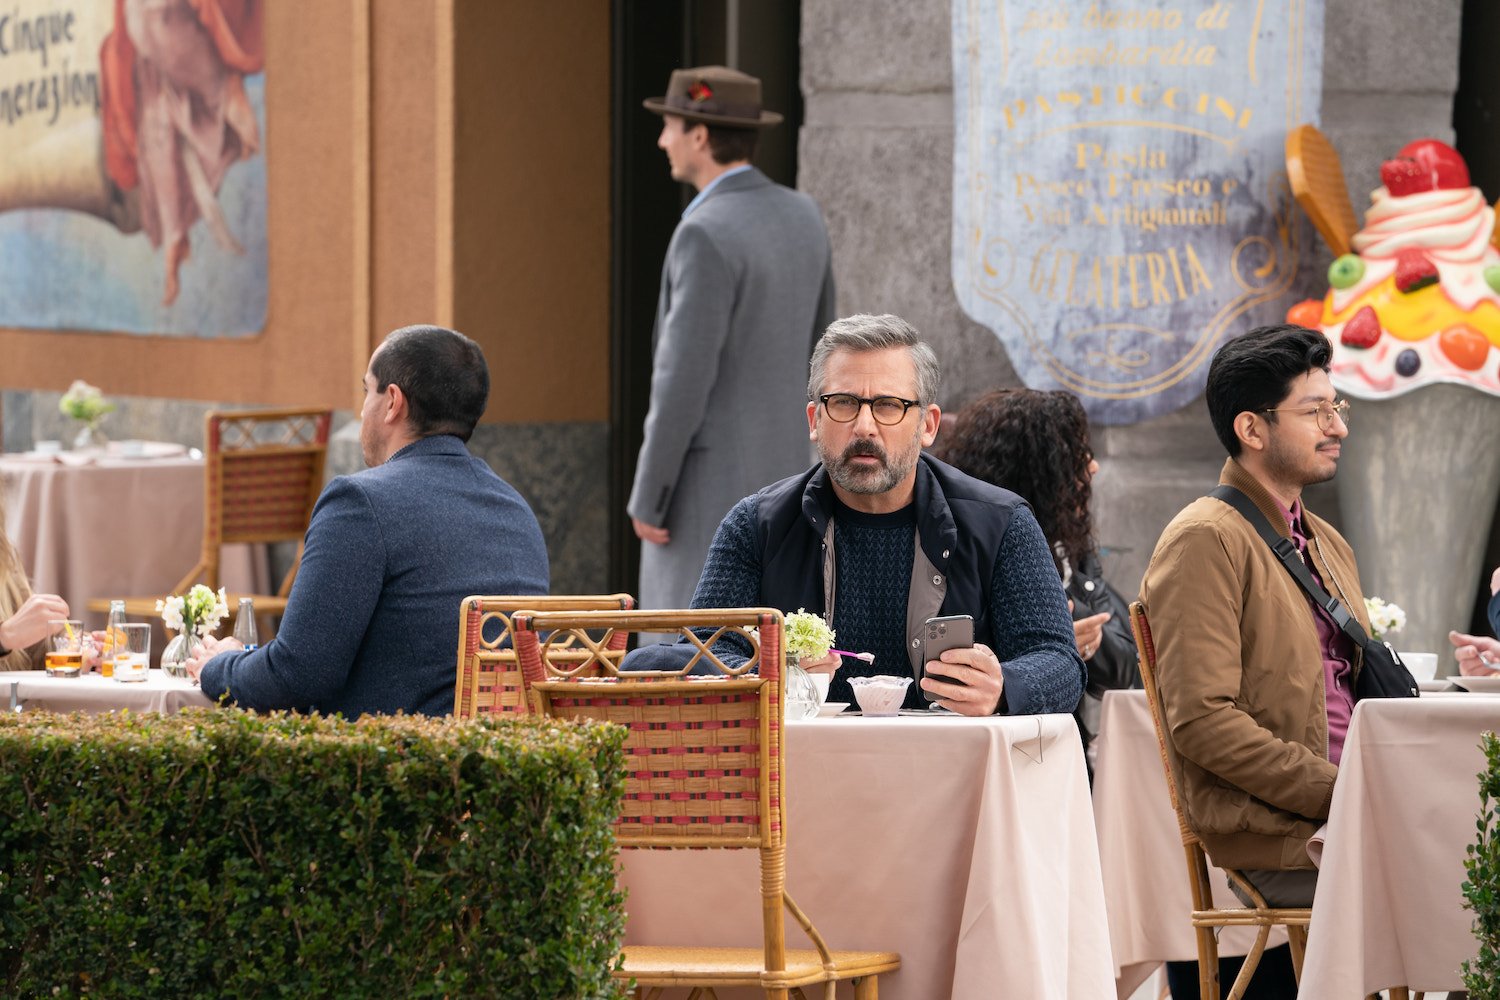 Steve Carell sits at a table holding his phone and a spoon as he looks on in 'The Morning Show' Season 2 Episode 2 'It's Like the Flu'